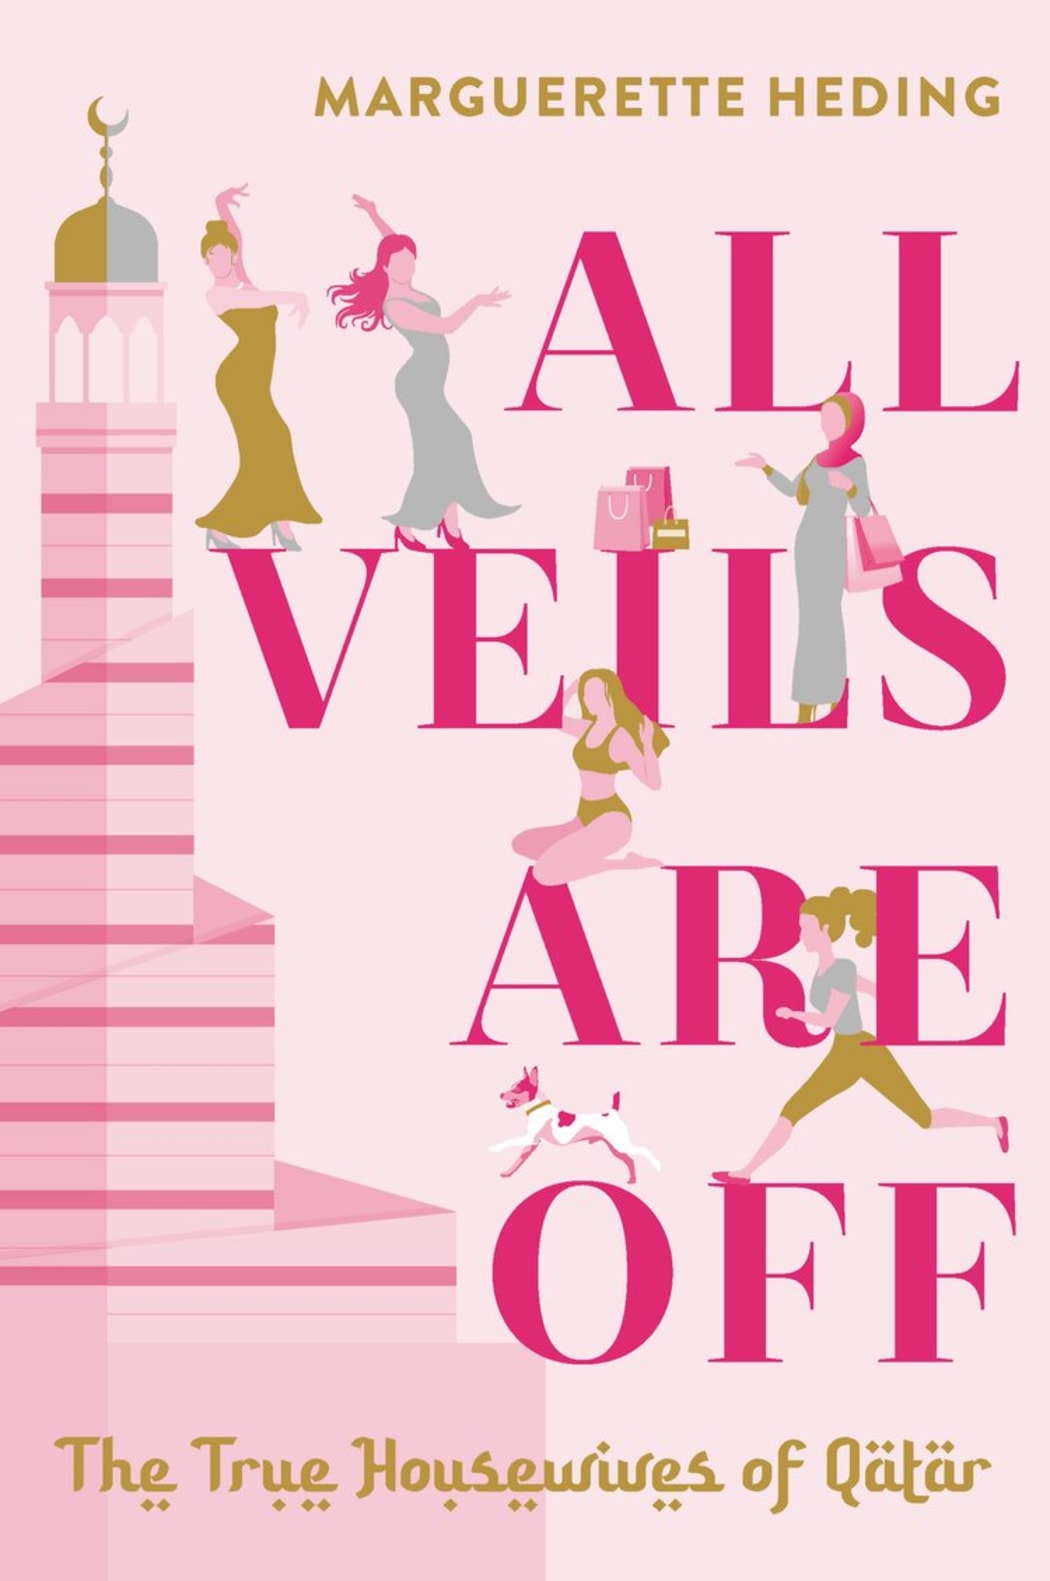 The cover for the book All Veils Are Off written by Marguerette Heding